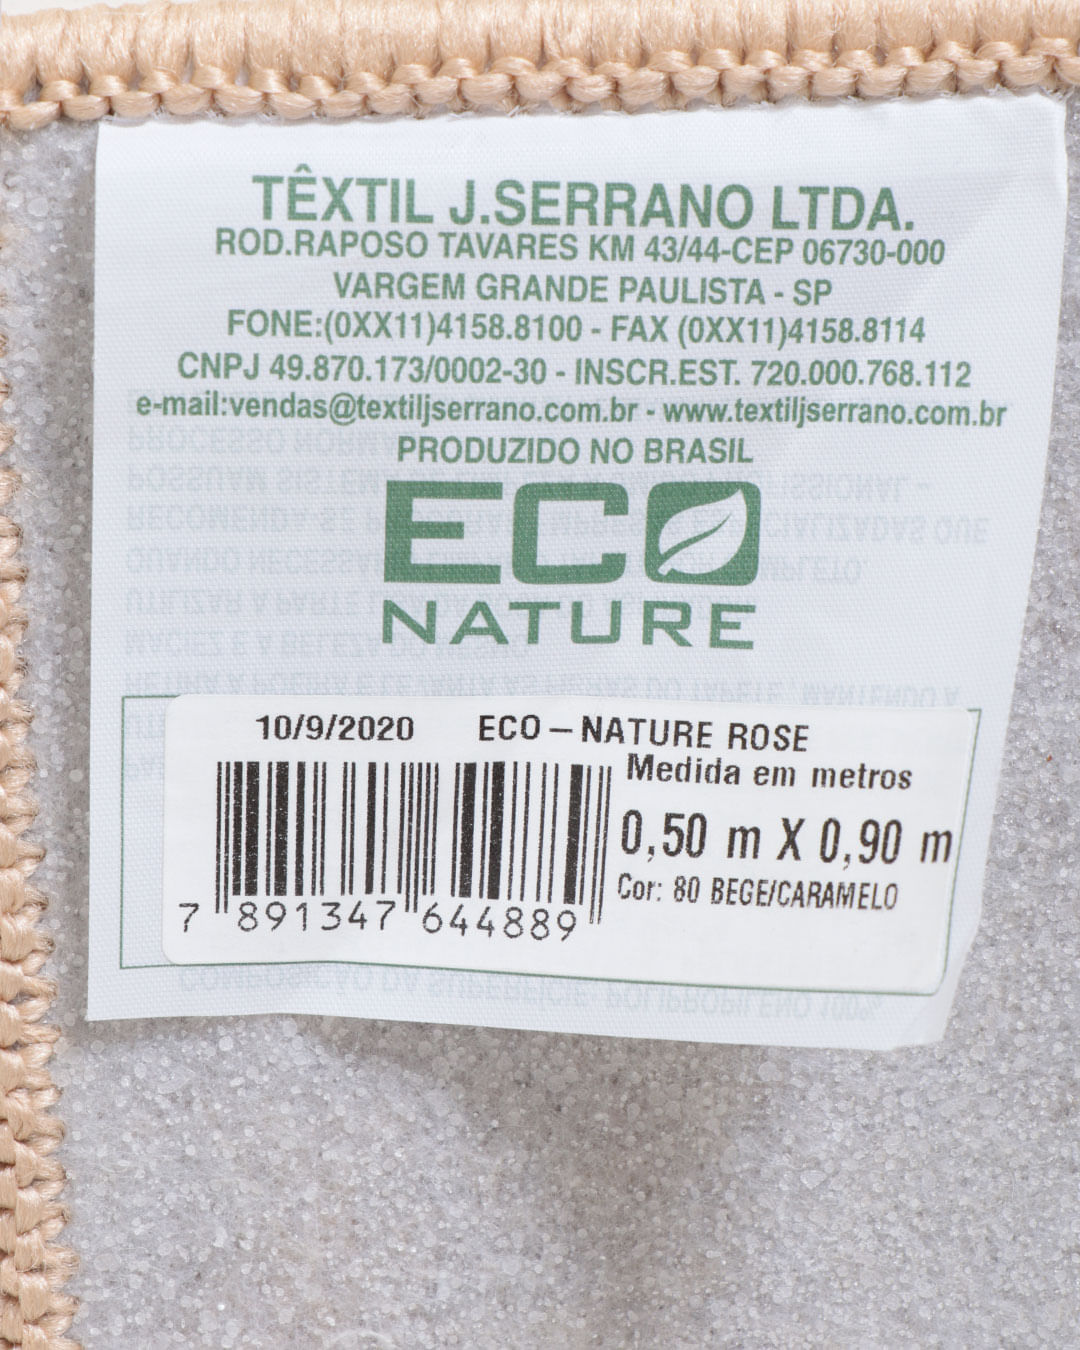 Tapete-50cmx-90cm-Eco-Nature-Floral-Bege-